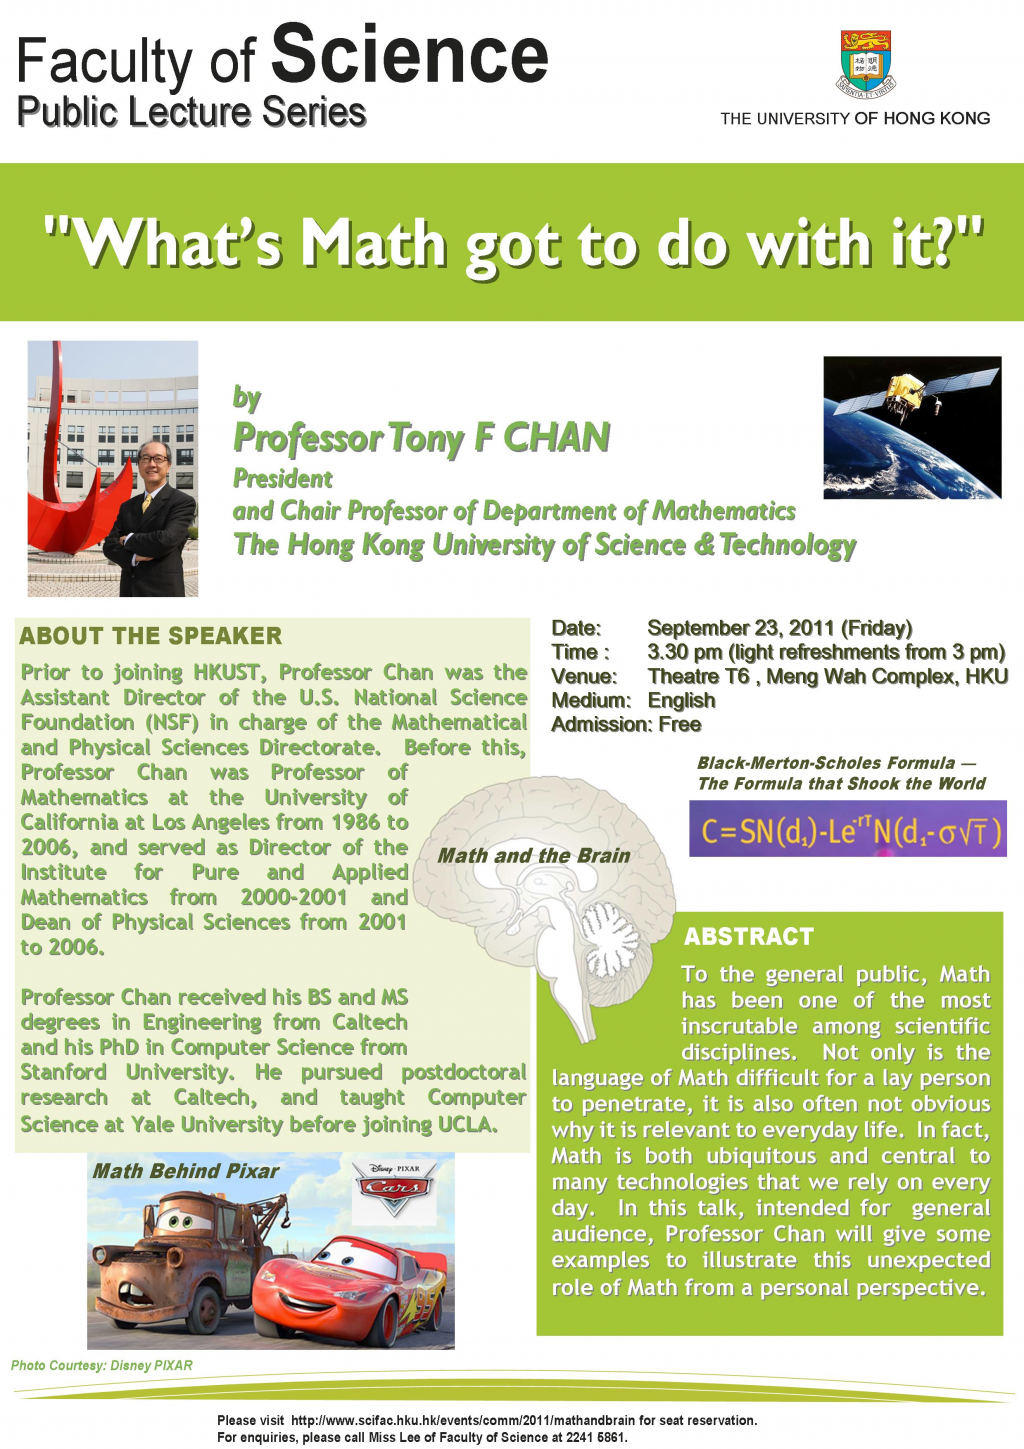 Public Lecture Series “What's Math got to do with it?